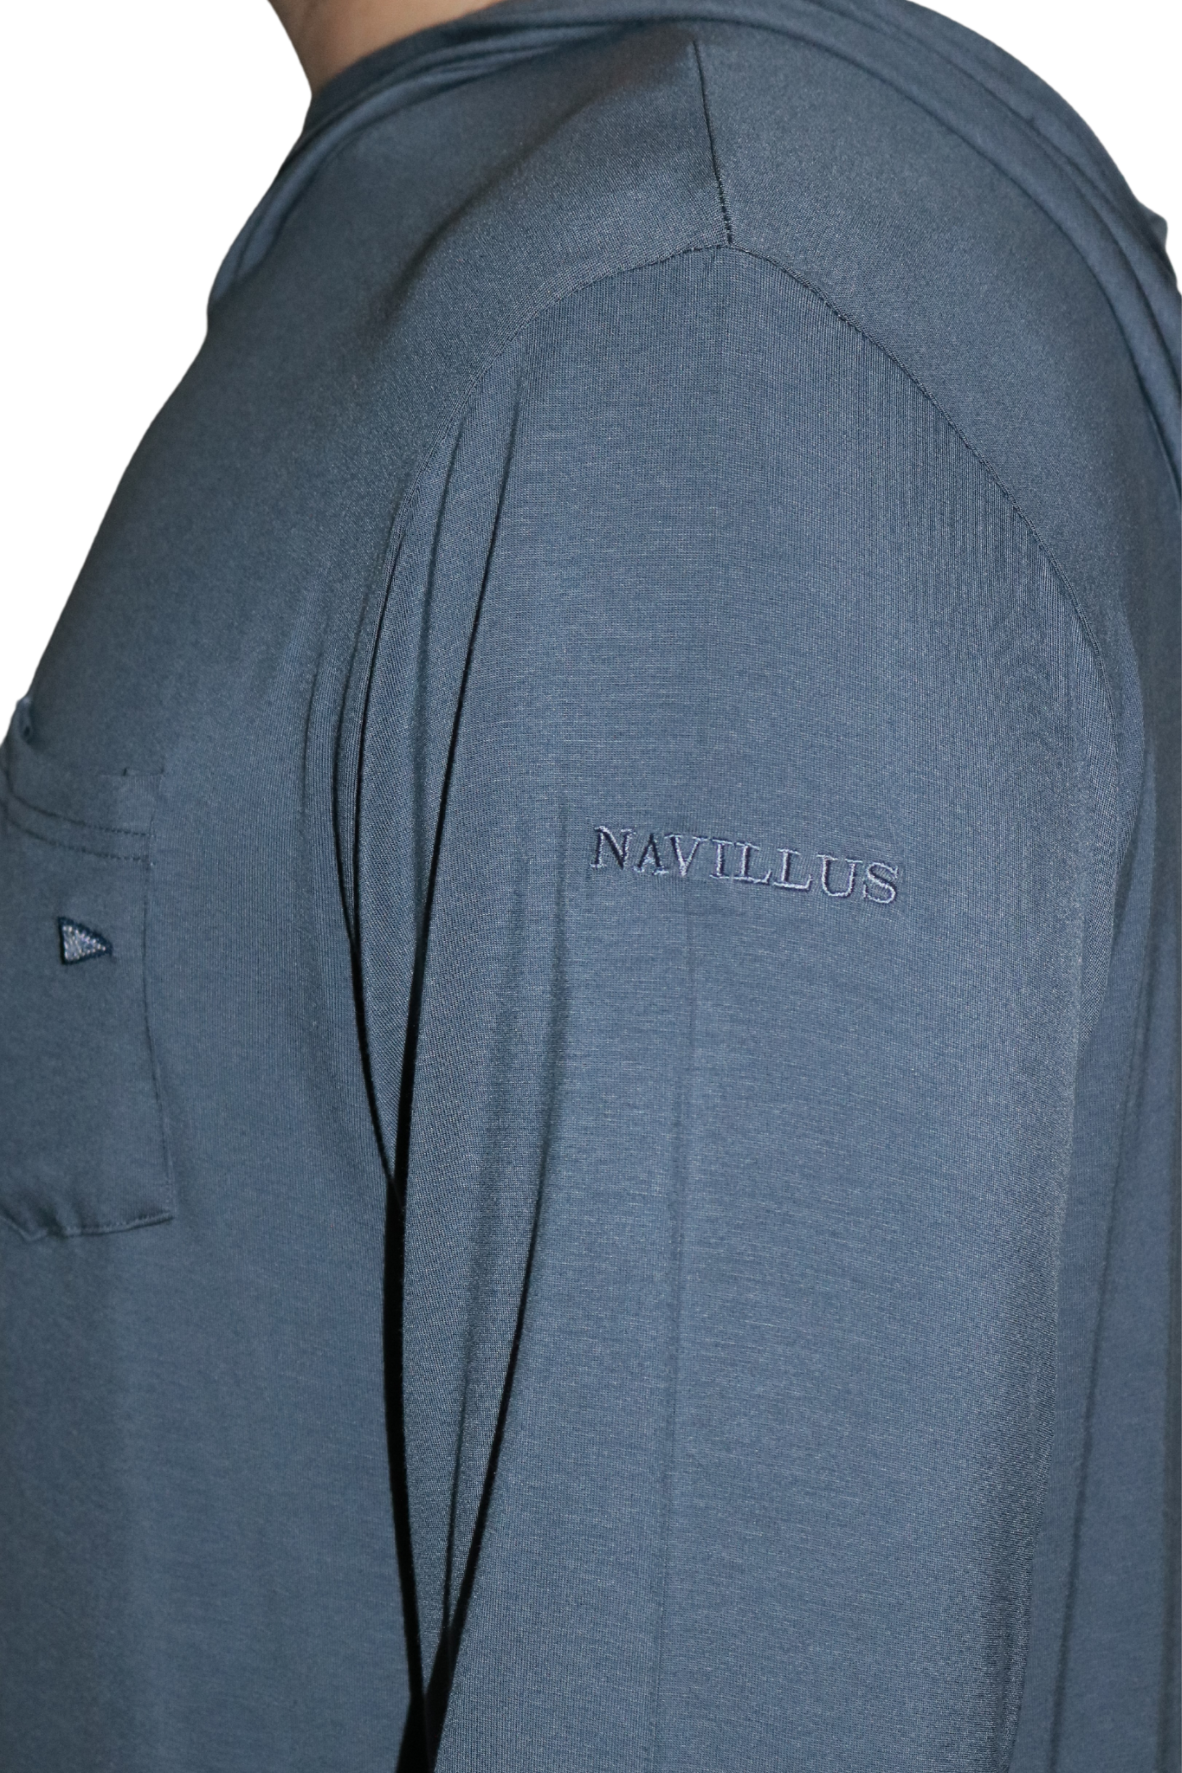 Side logo of the Angler Crossover Bamboo Hoodie.